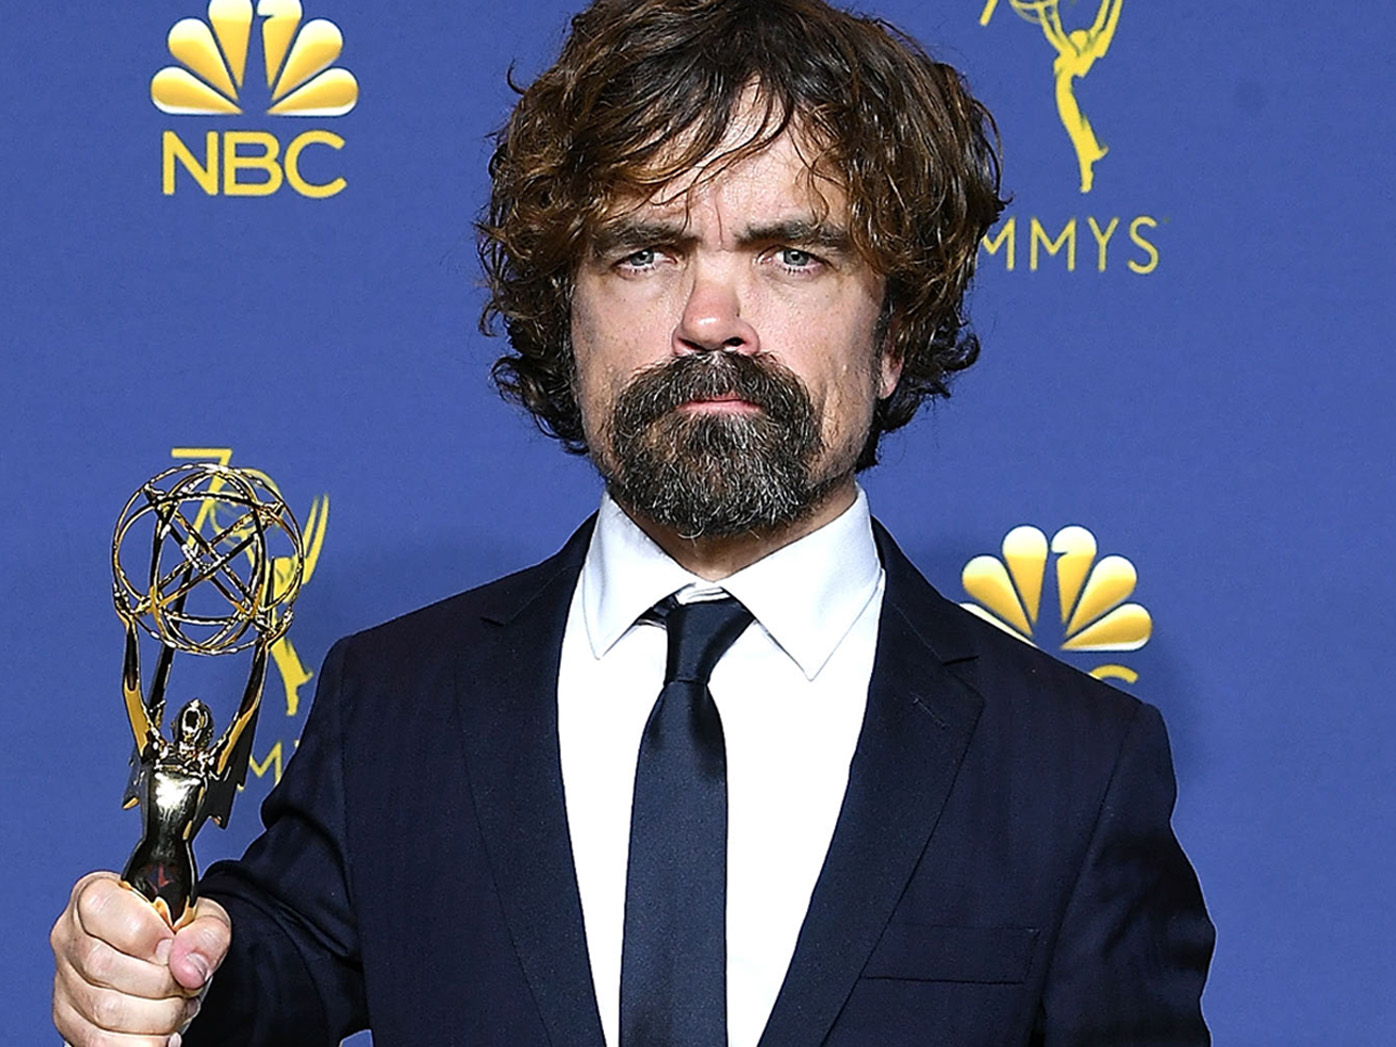 Peter Dinklage wins Best Supporting Actor in a Drama Series at the 2018 Emmys